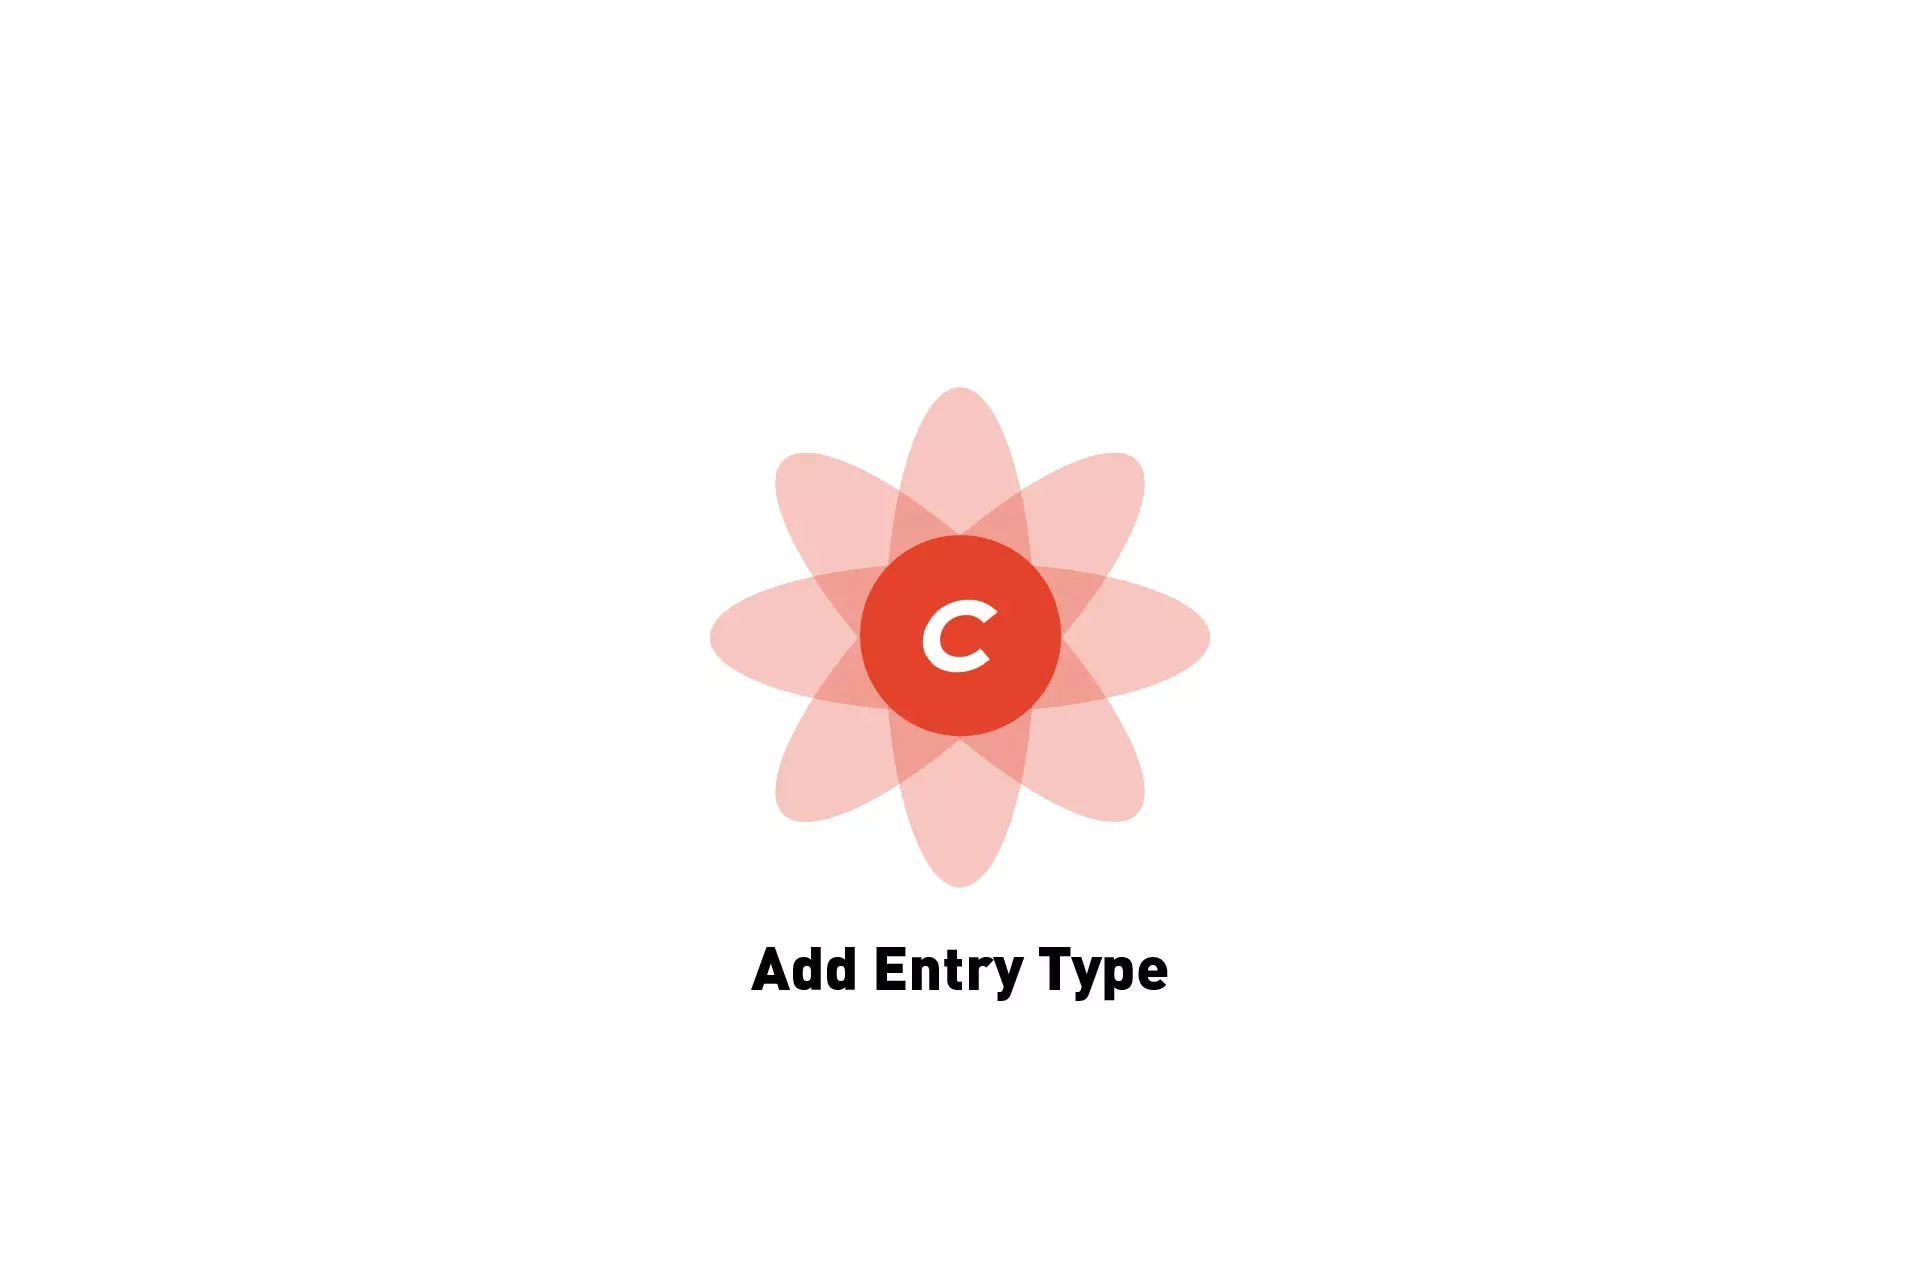 A flower that represents Craft CMS, beneath it sits the text "Add Entry Type."